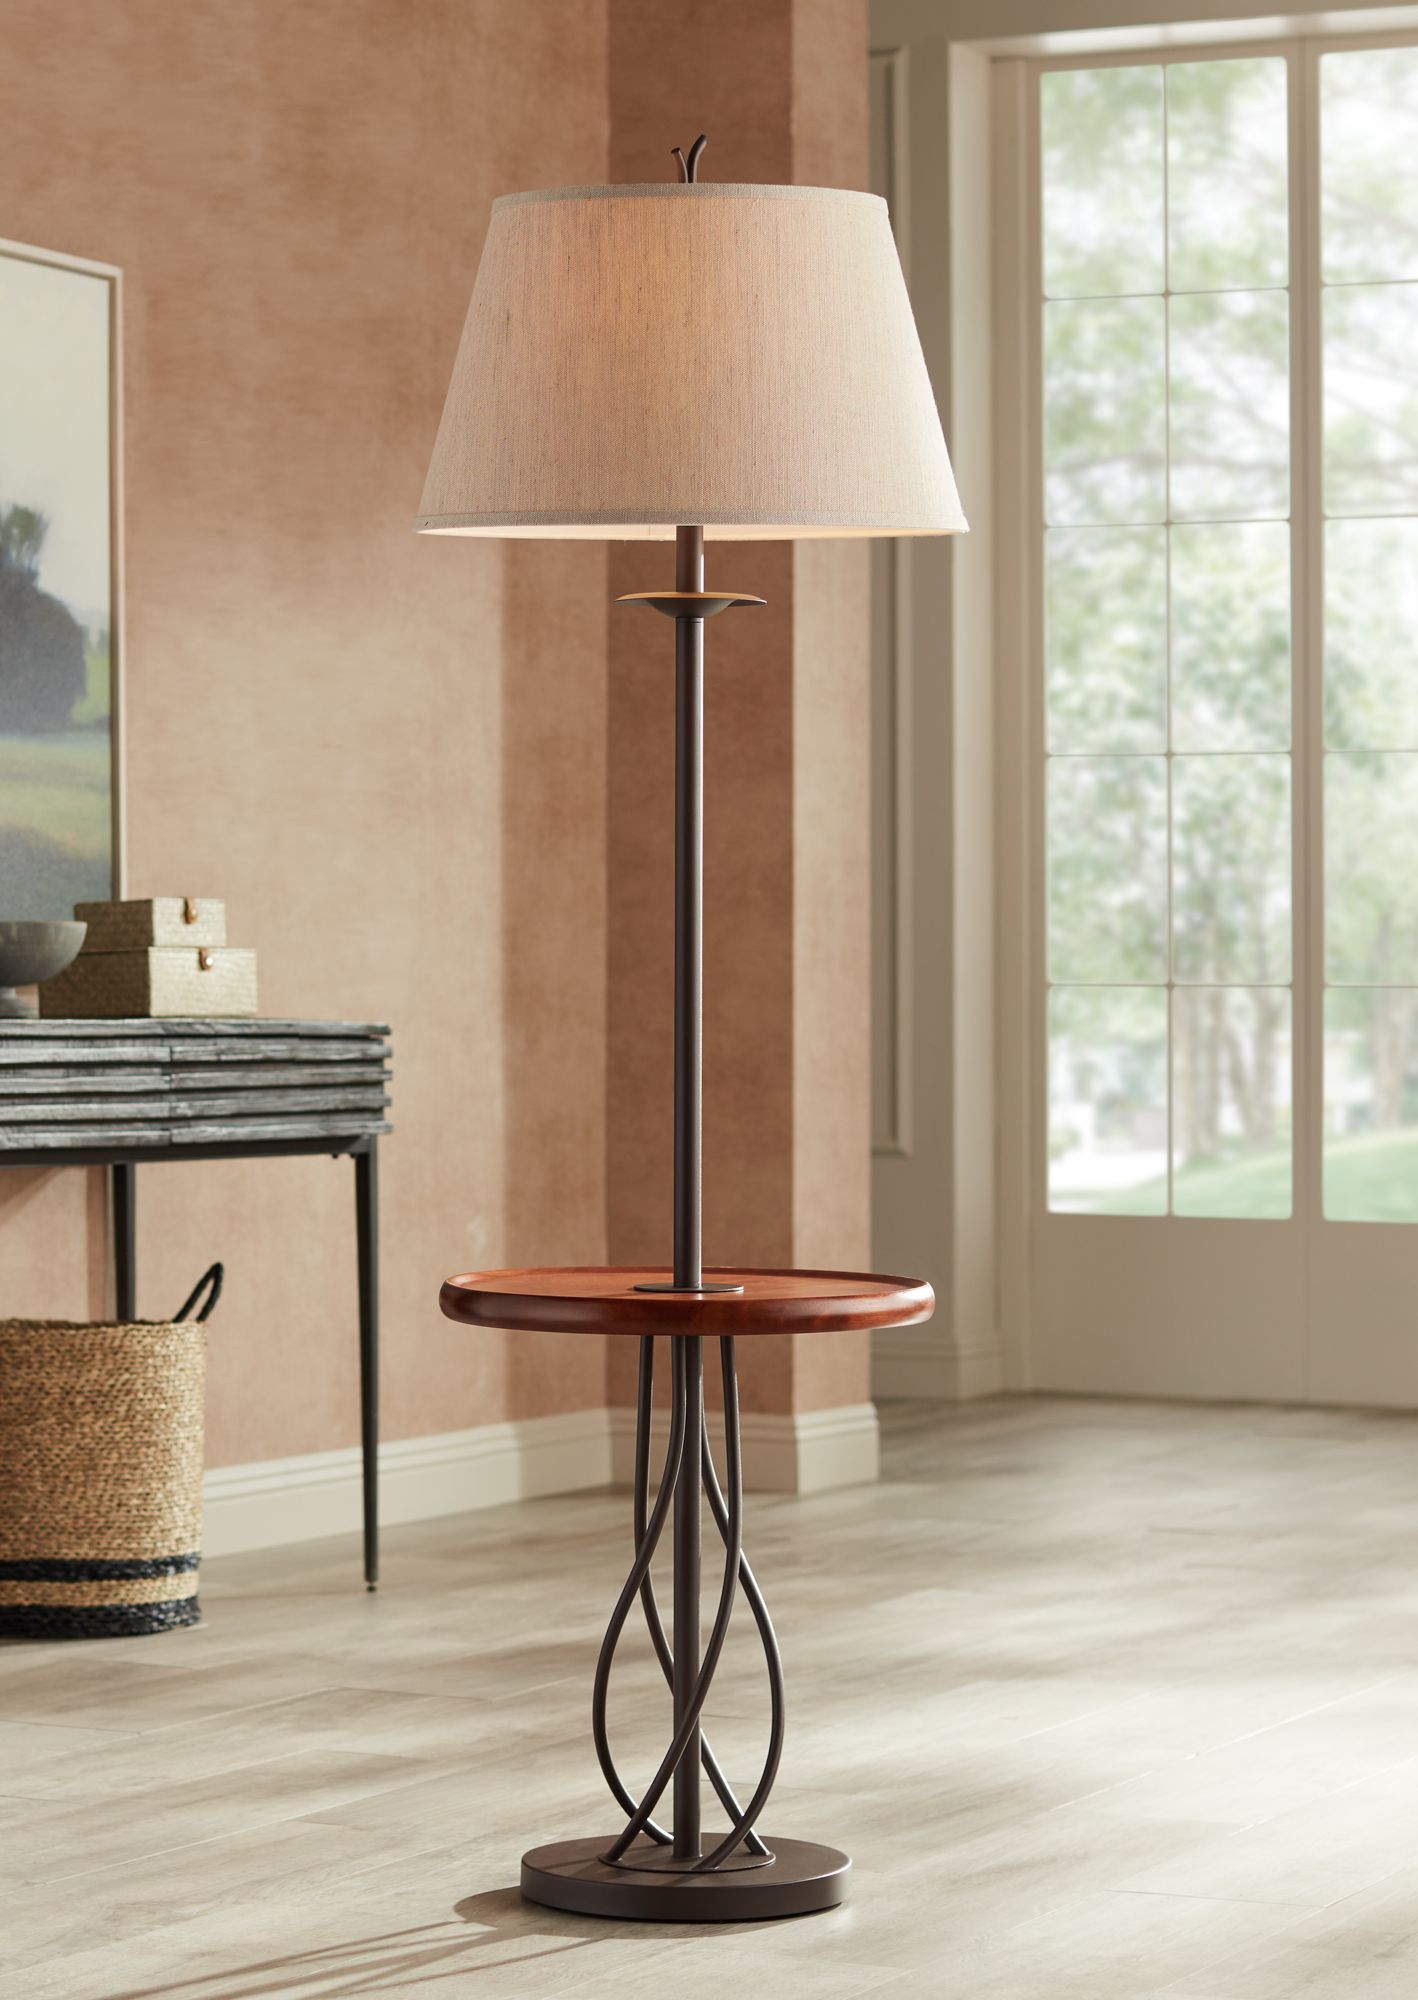 side table with lamp attached